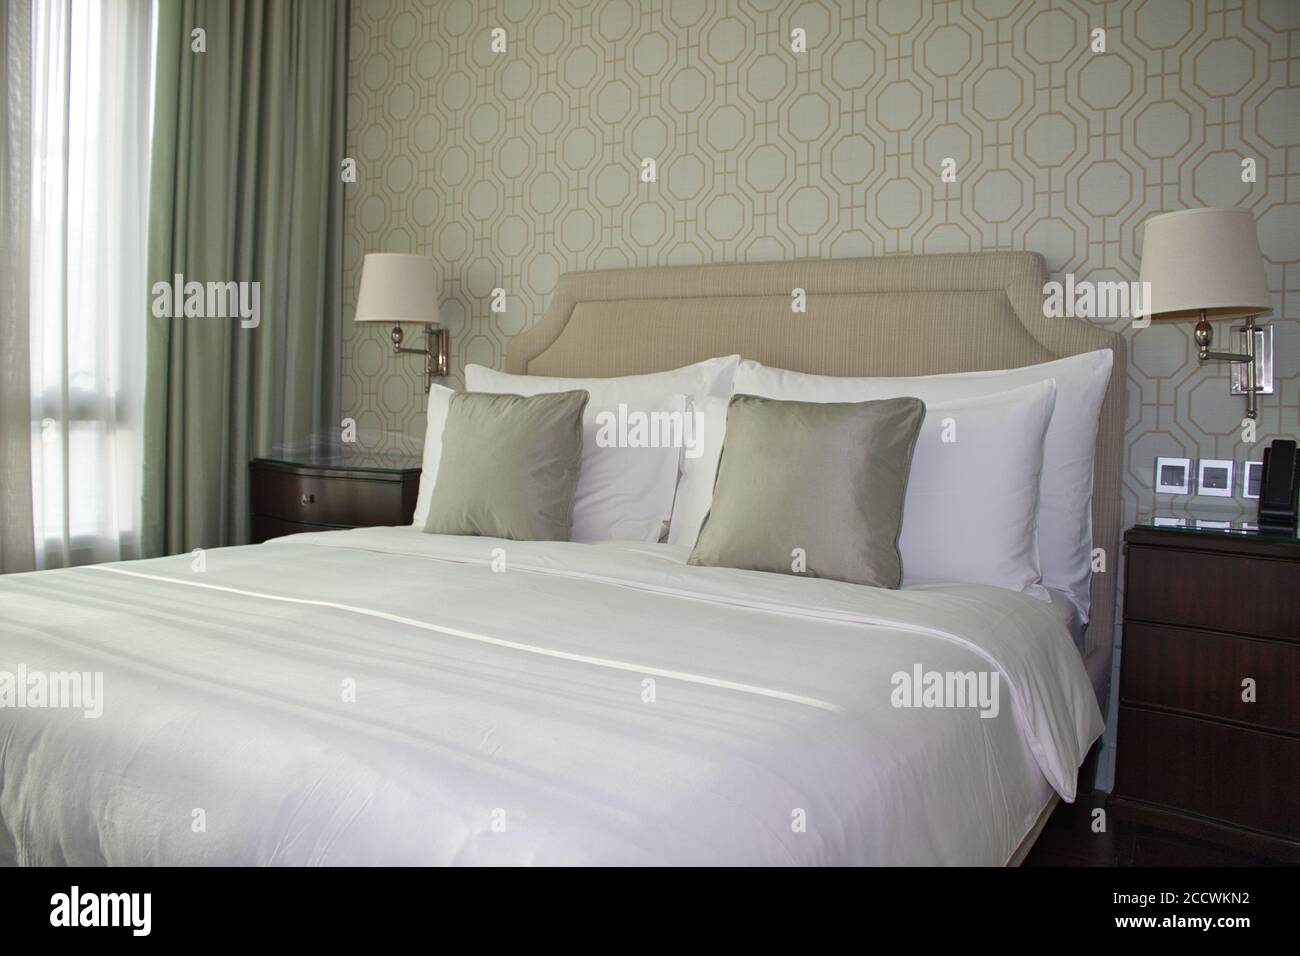 A beautifully prepared hotel room bed in oriental style. Stock Photo